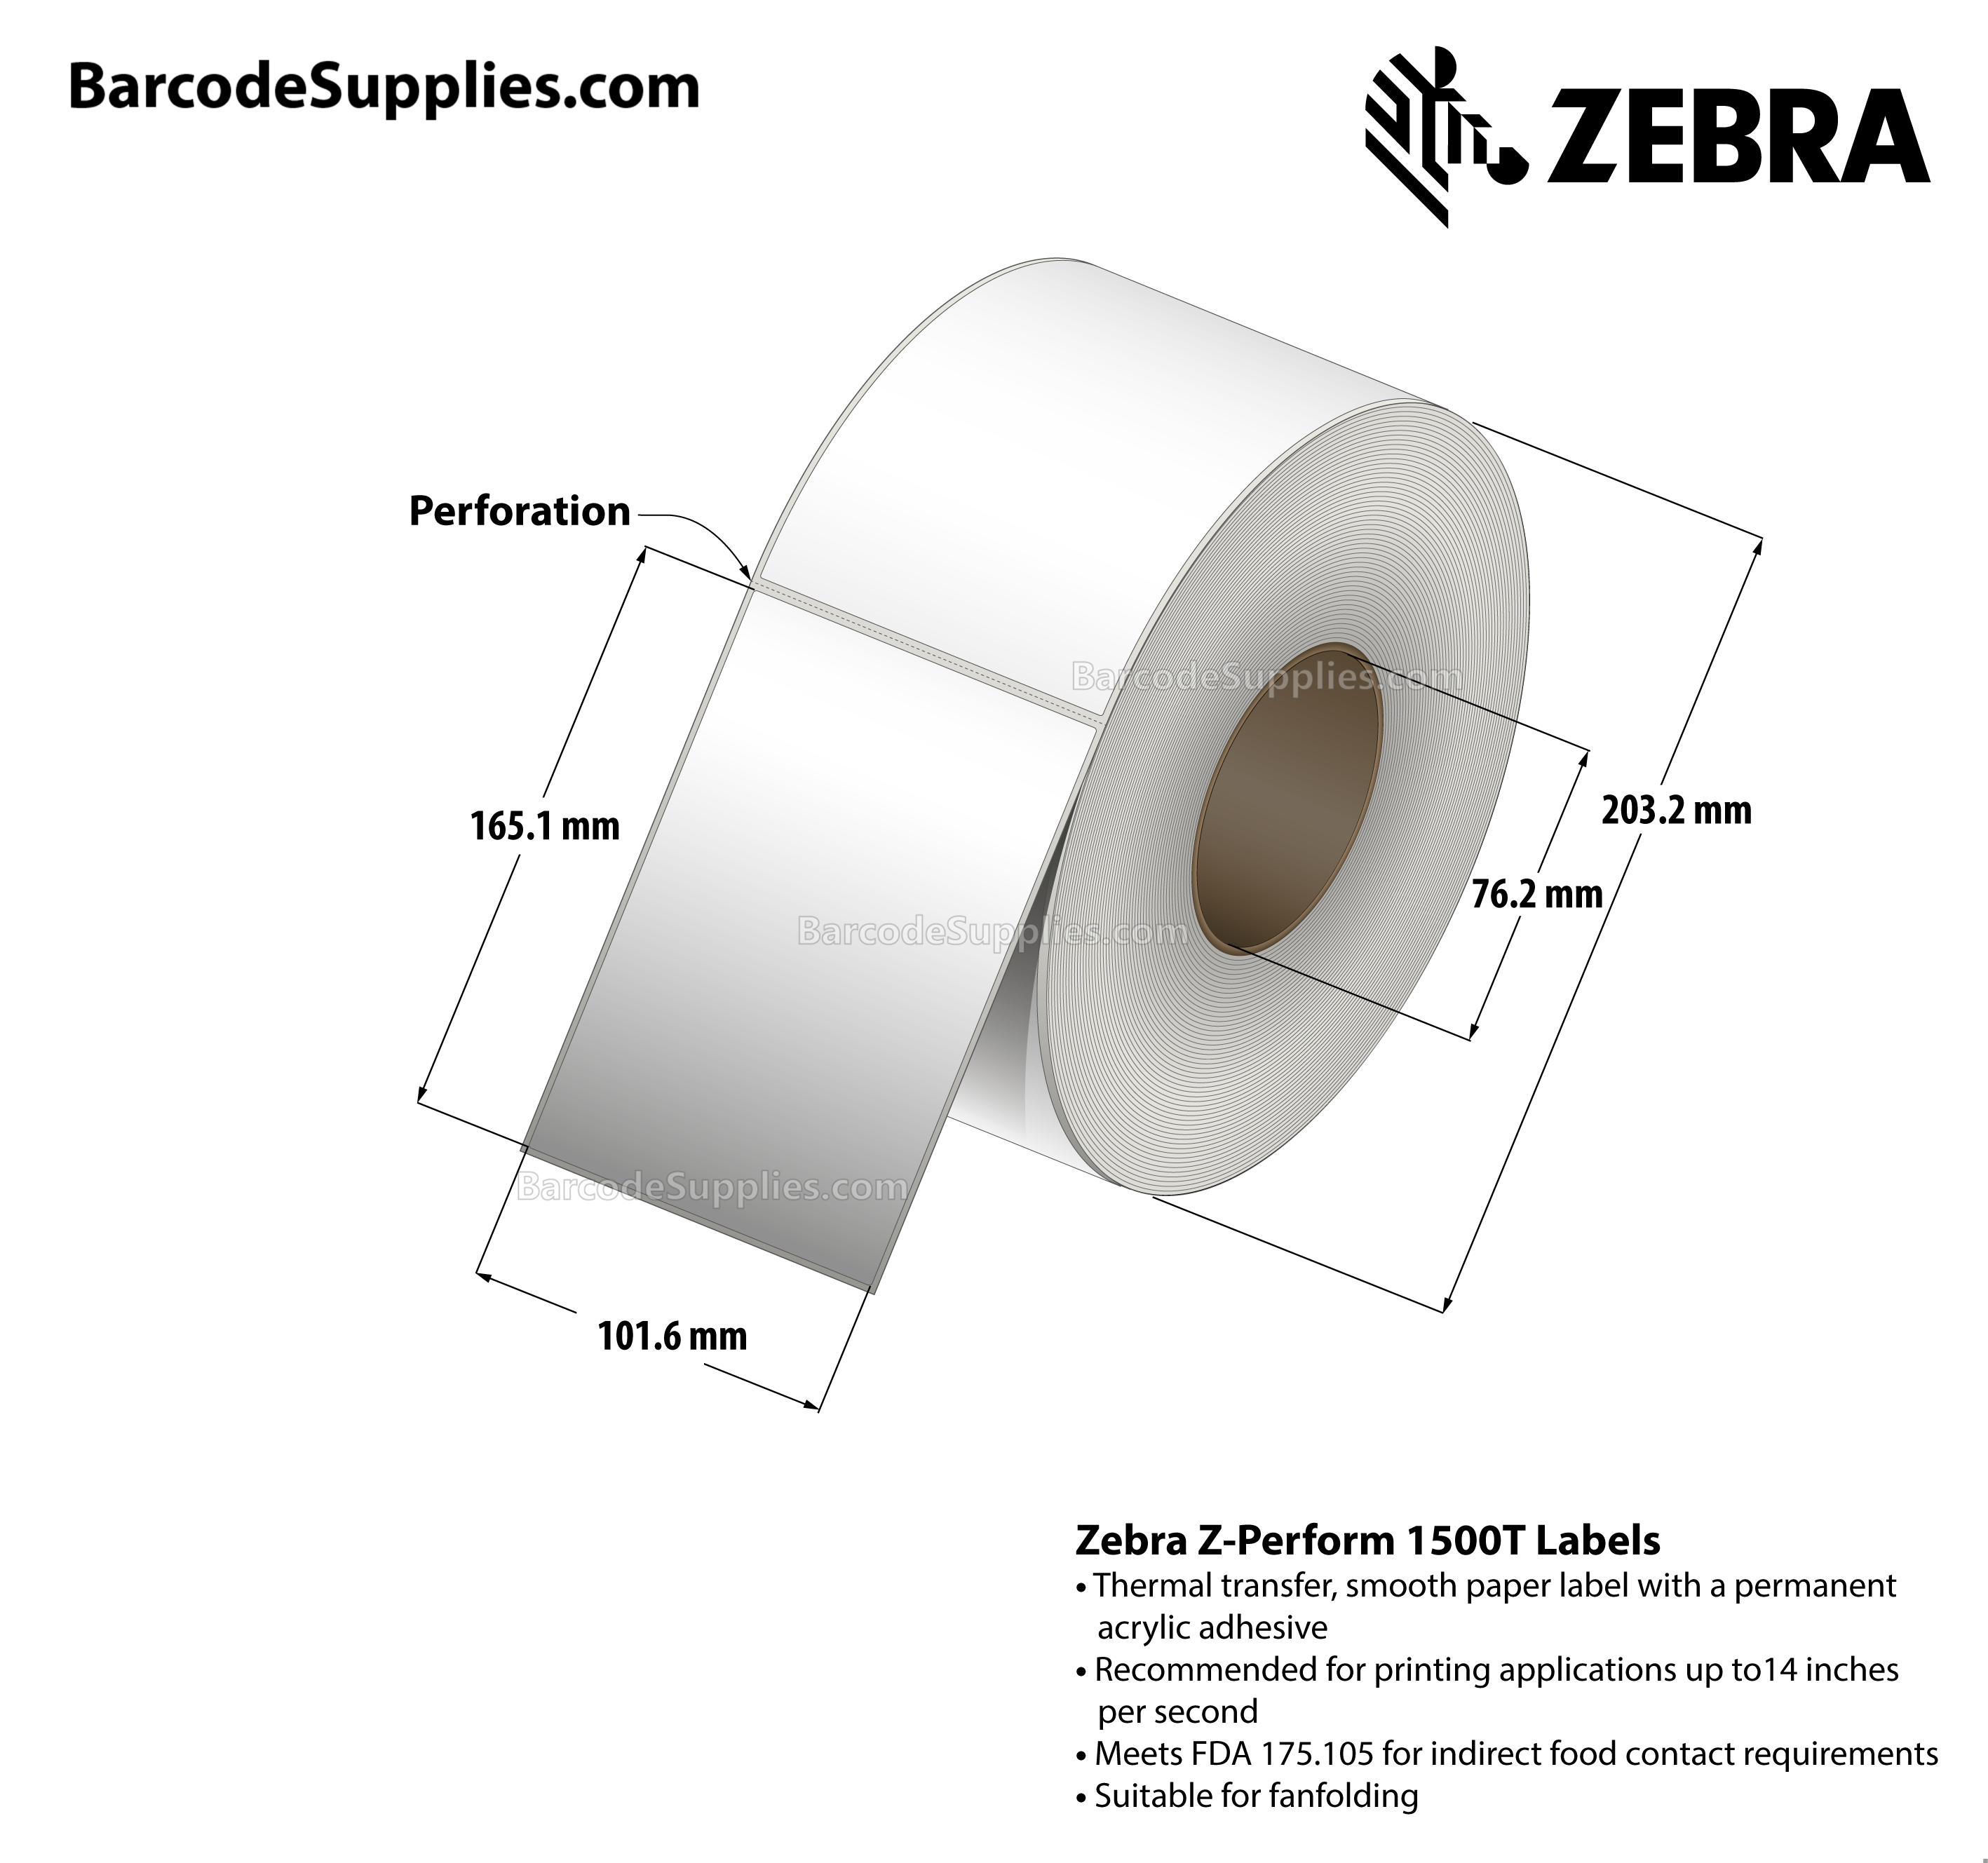 4 x 6.5 Thermal Transfer White Z-Perform 1500T Labels With Permanent Adhesive - Perforated - 900 Labels Per Roll - Carton Of 4 Rolls - 3600 Labels Total - MPN: 10021229